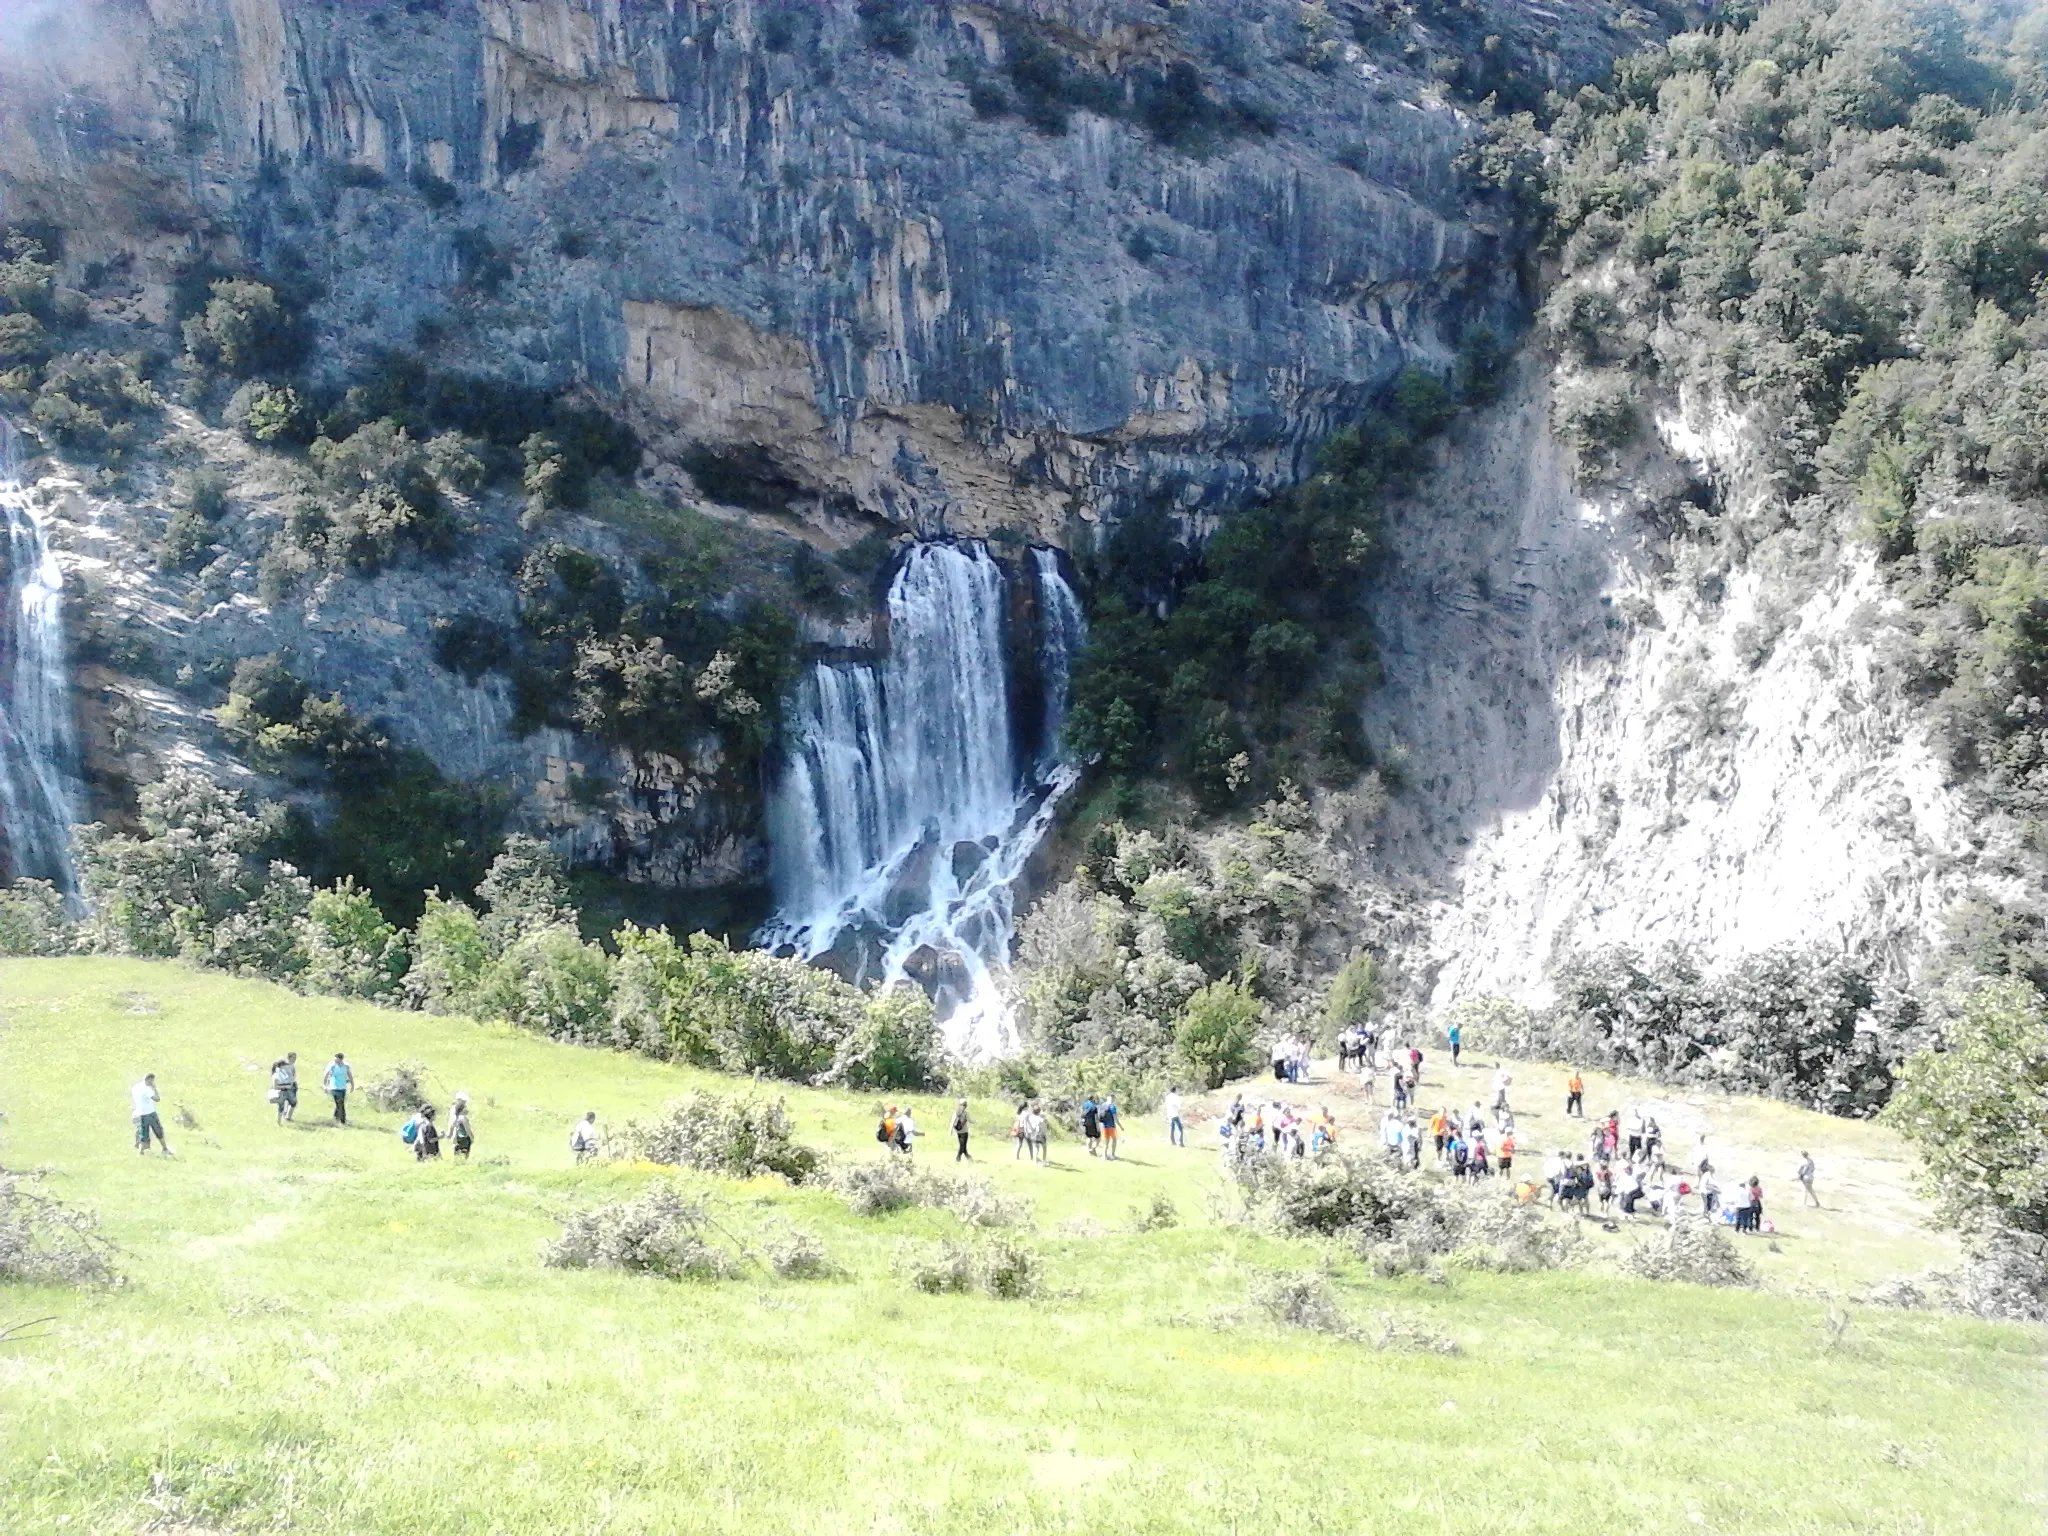 Photo showing: Ujëvara e Sotirës në Gramsh, Elbasan, Shqipëri. English: Sotira Waterfall located in Gramsh, Elbasan, ALbania.

Disclaimer: I took this photo as part of a hiking trip with AST Elbasani Hiking Agency. Other participants took some of the photos and shared on their profiles. So this photo can be found also on facebook or website of the agency.